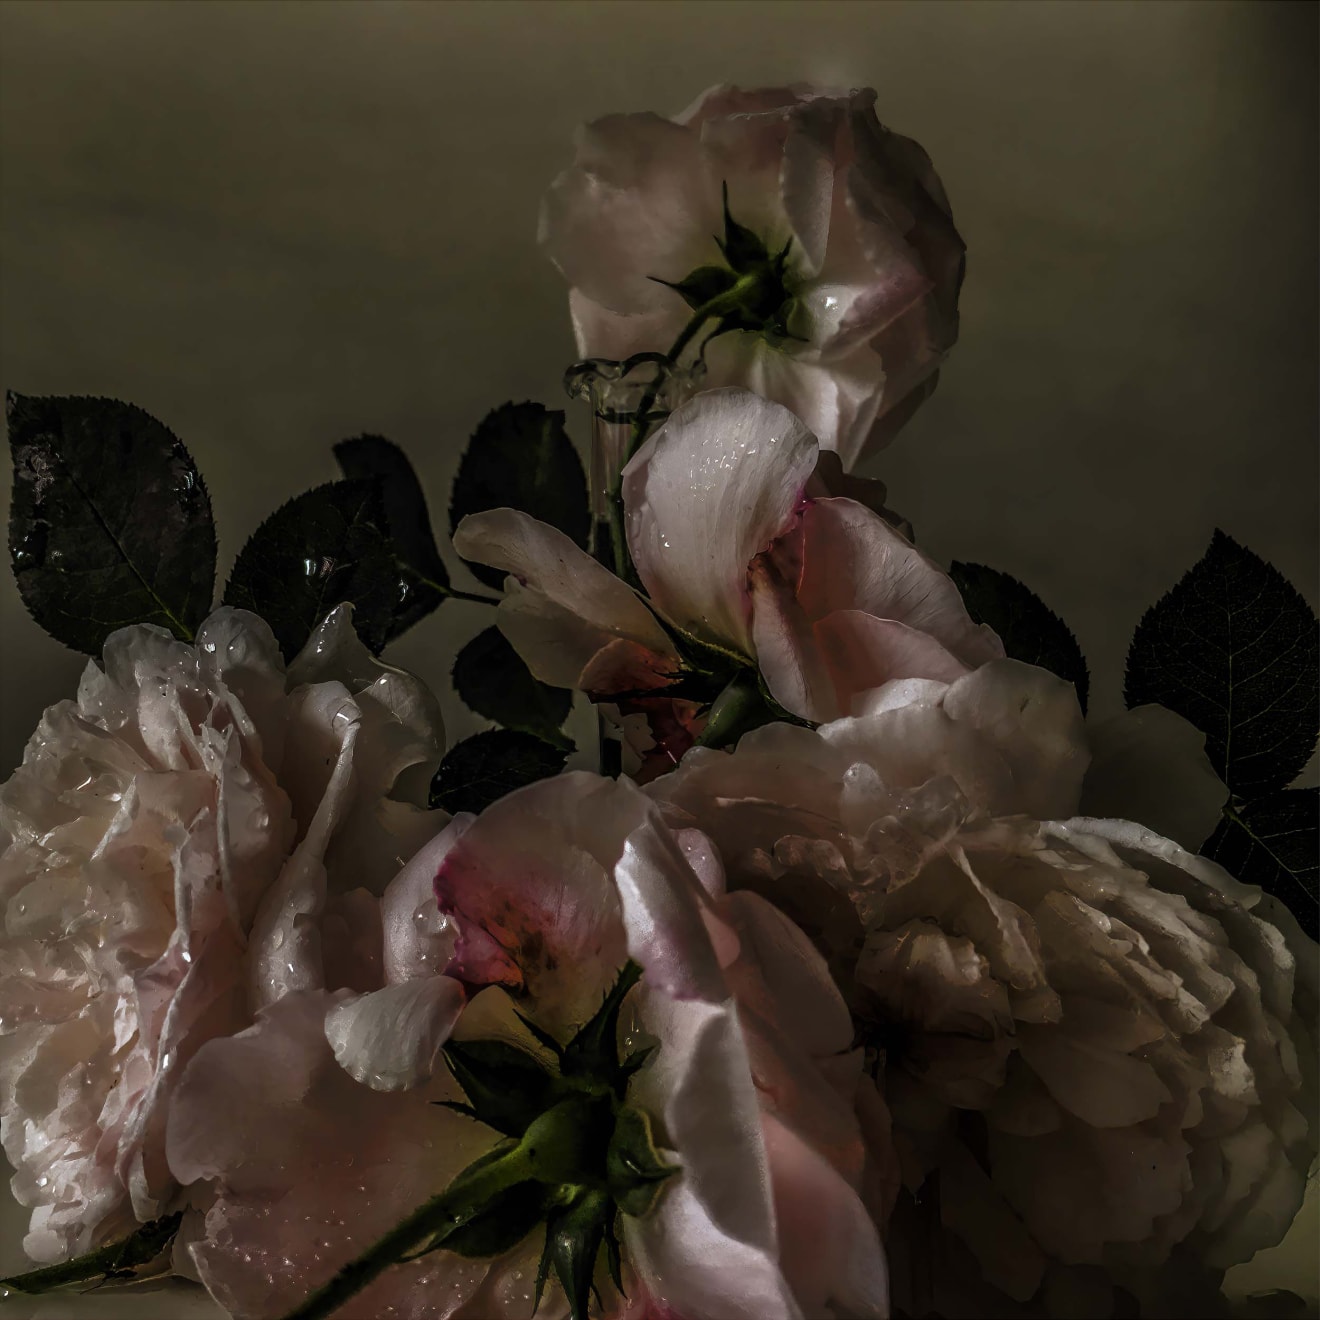 Nick Knight Sunday 9th October, 2016, 2019 Hand-coated pigment print (KNI 023)